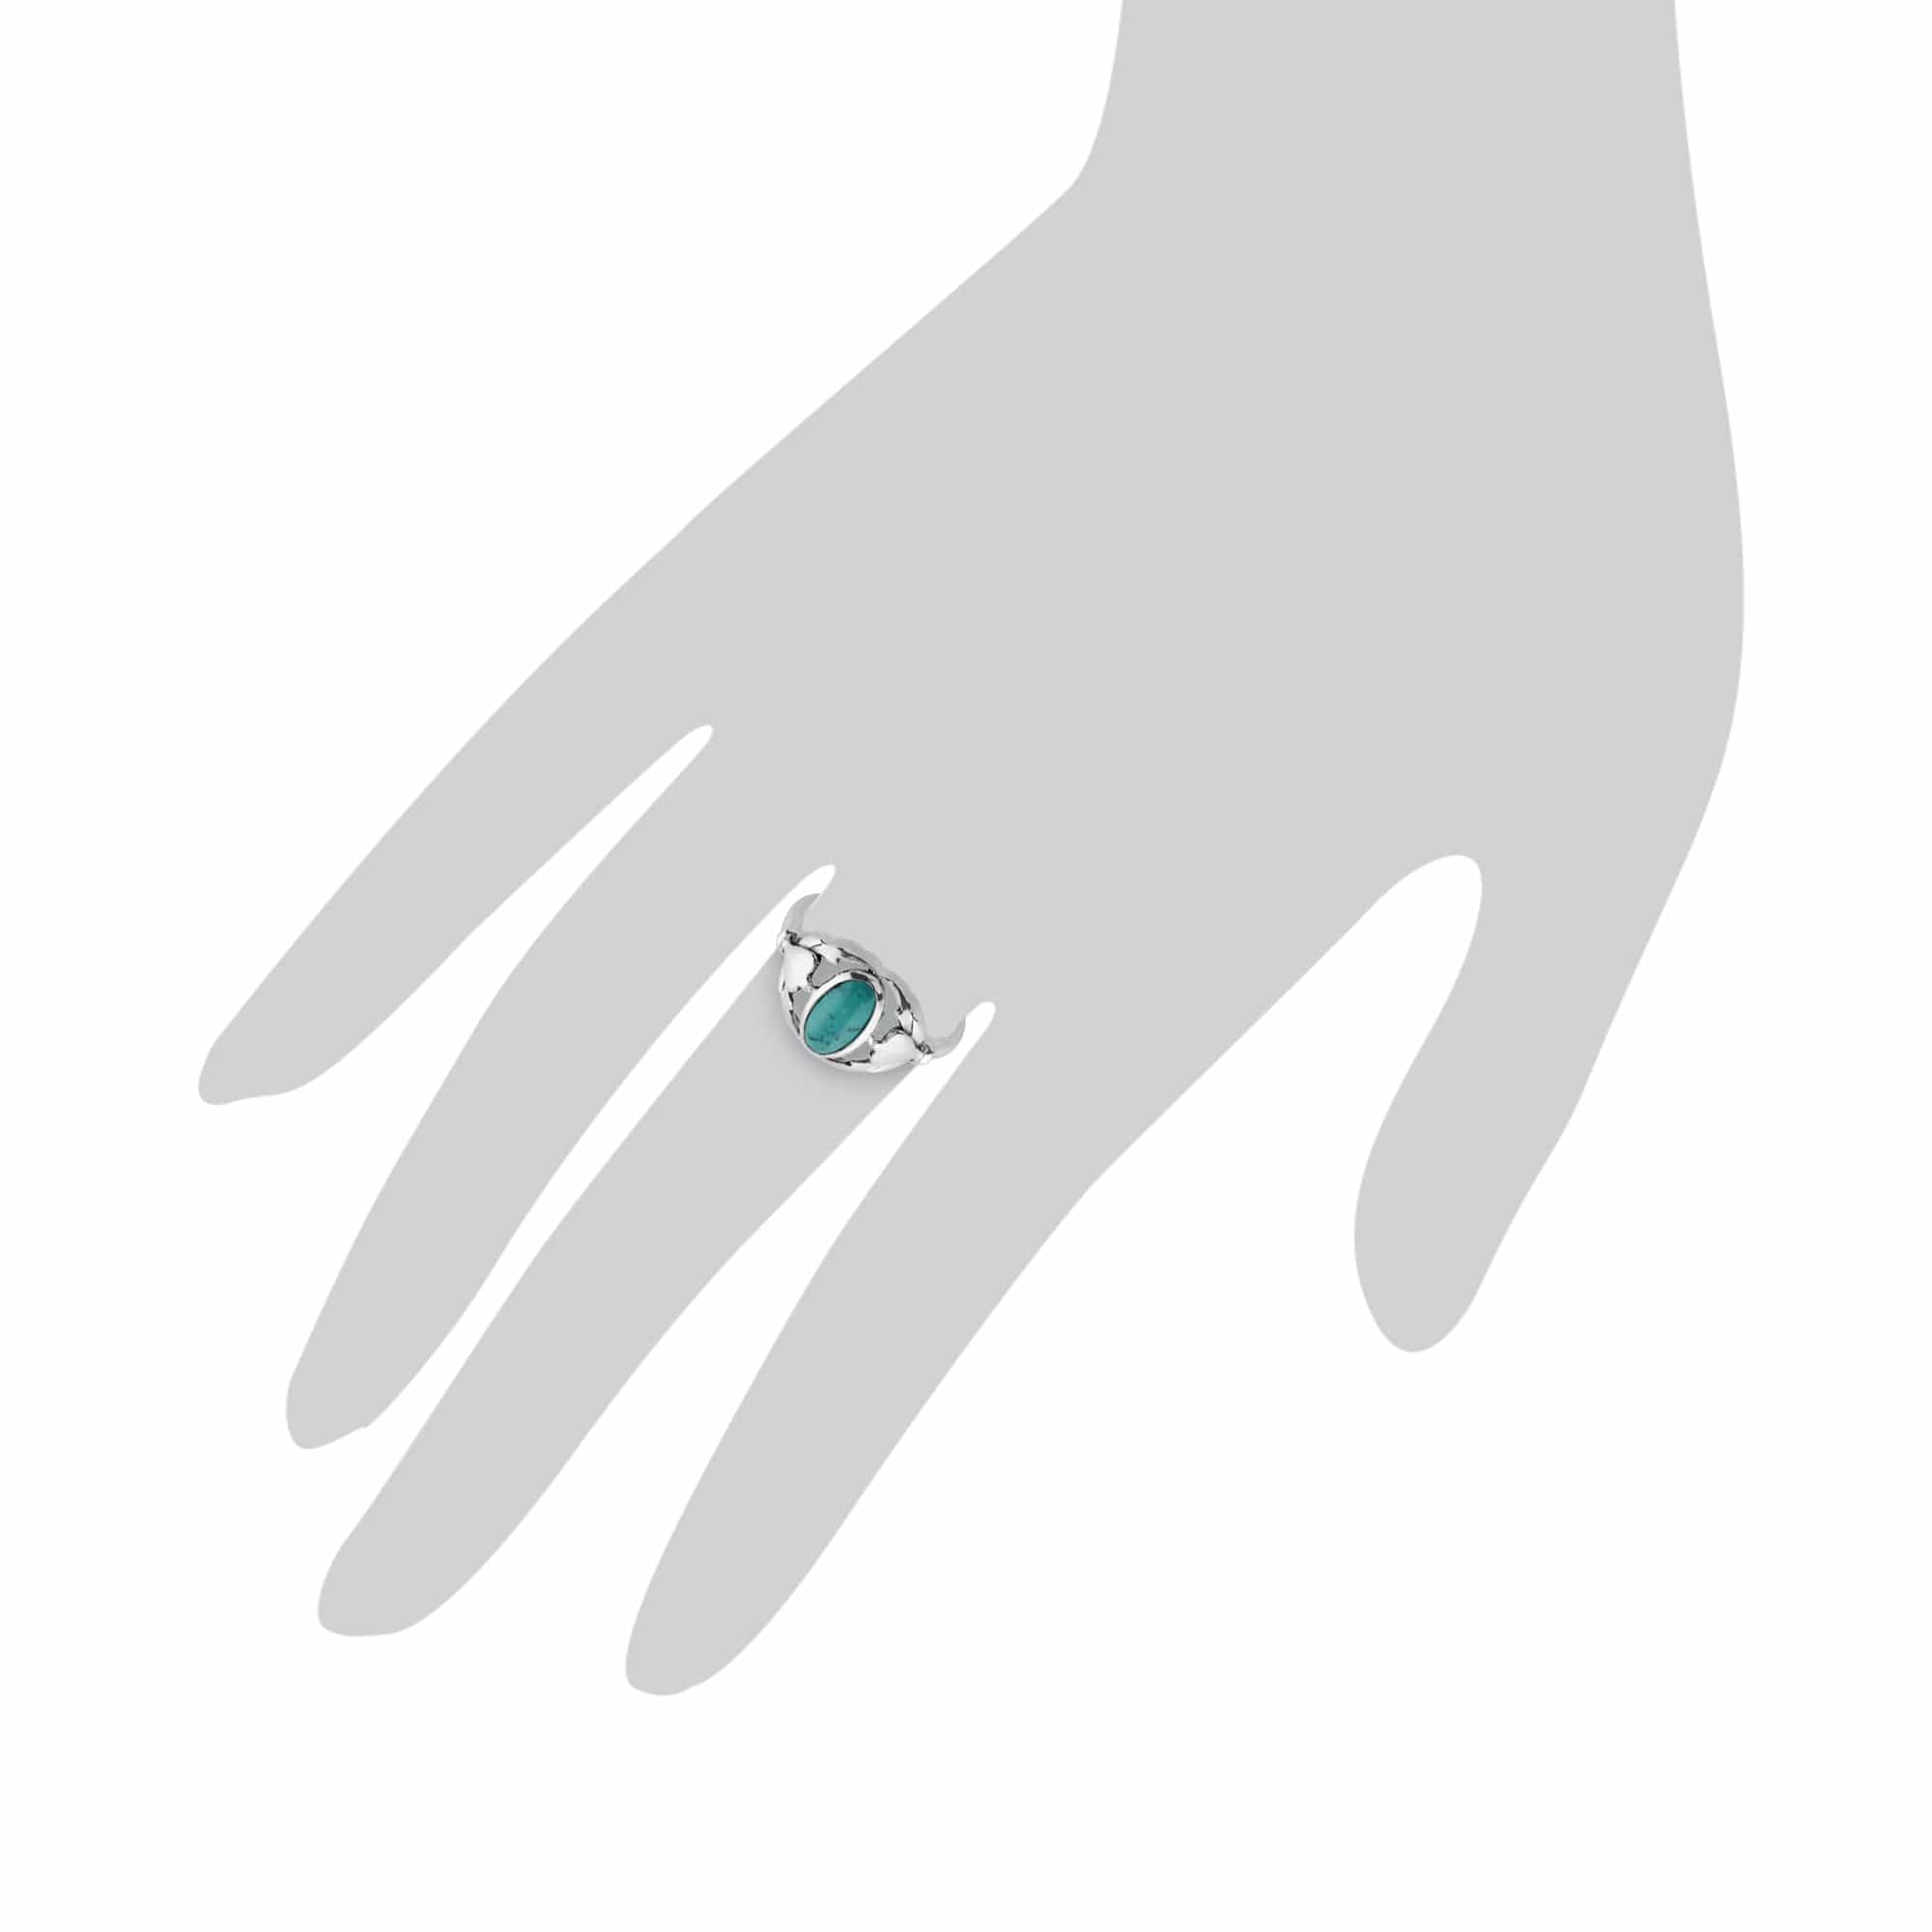 241R165704925 Gemondo 925 Sterling Silver 0.77ct Turquoise Ring 3